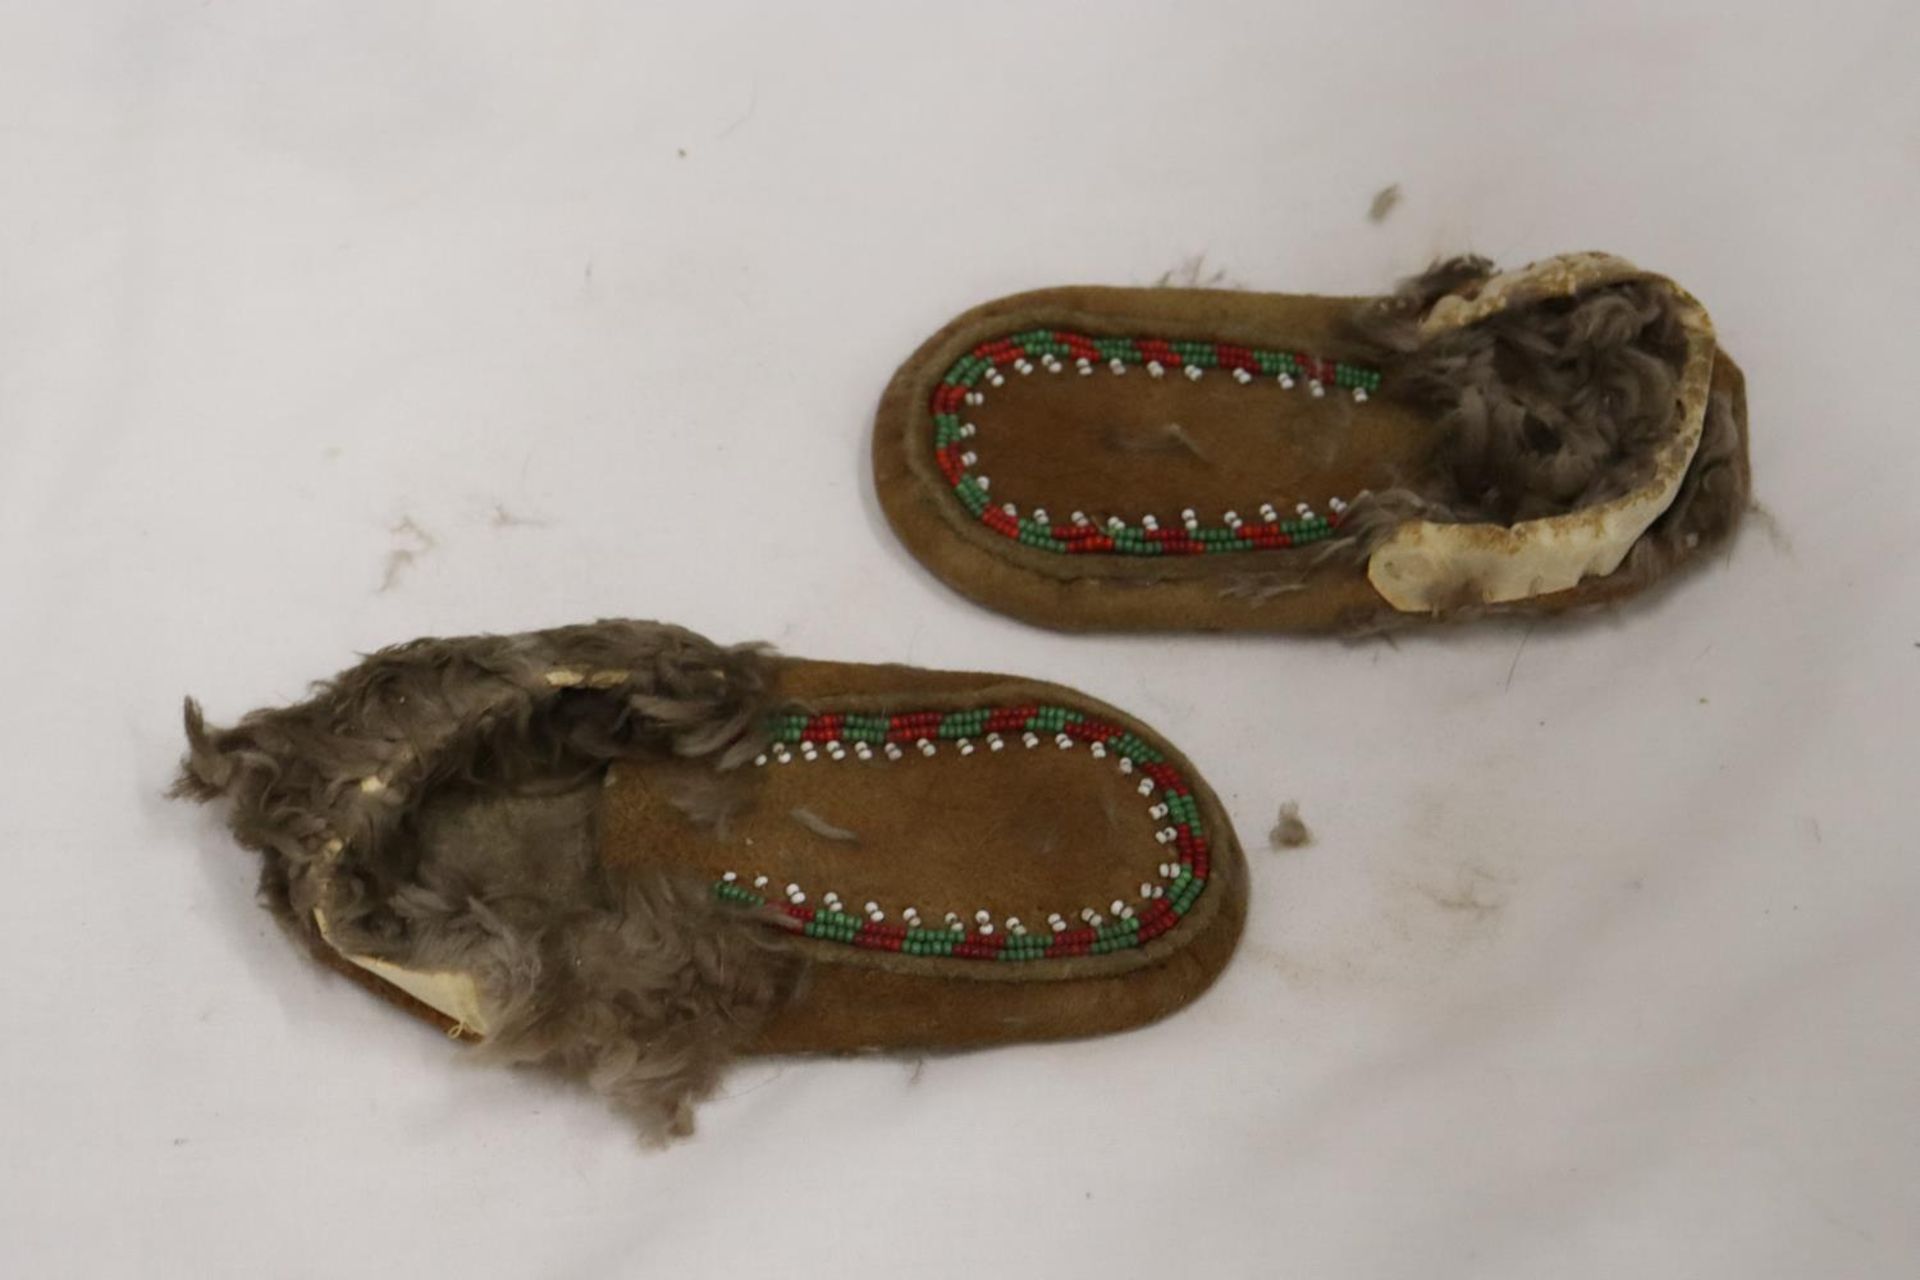 A PAIR OF SMALL CHILD'S NORTH AMERICAN MOCCASSINS WITH BEAD WORK TO THE FRONT - Image 4 of 4